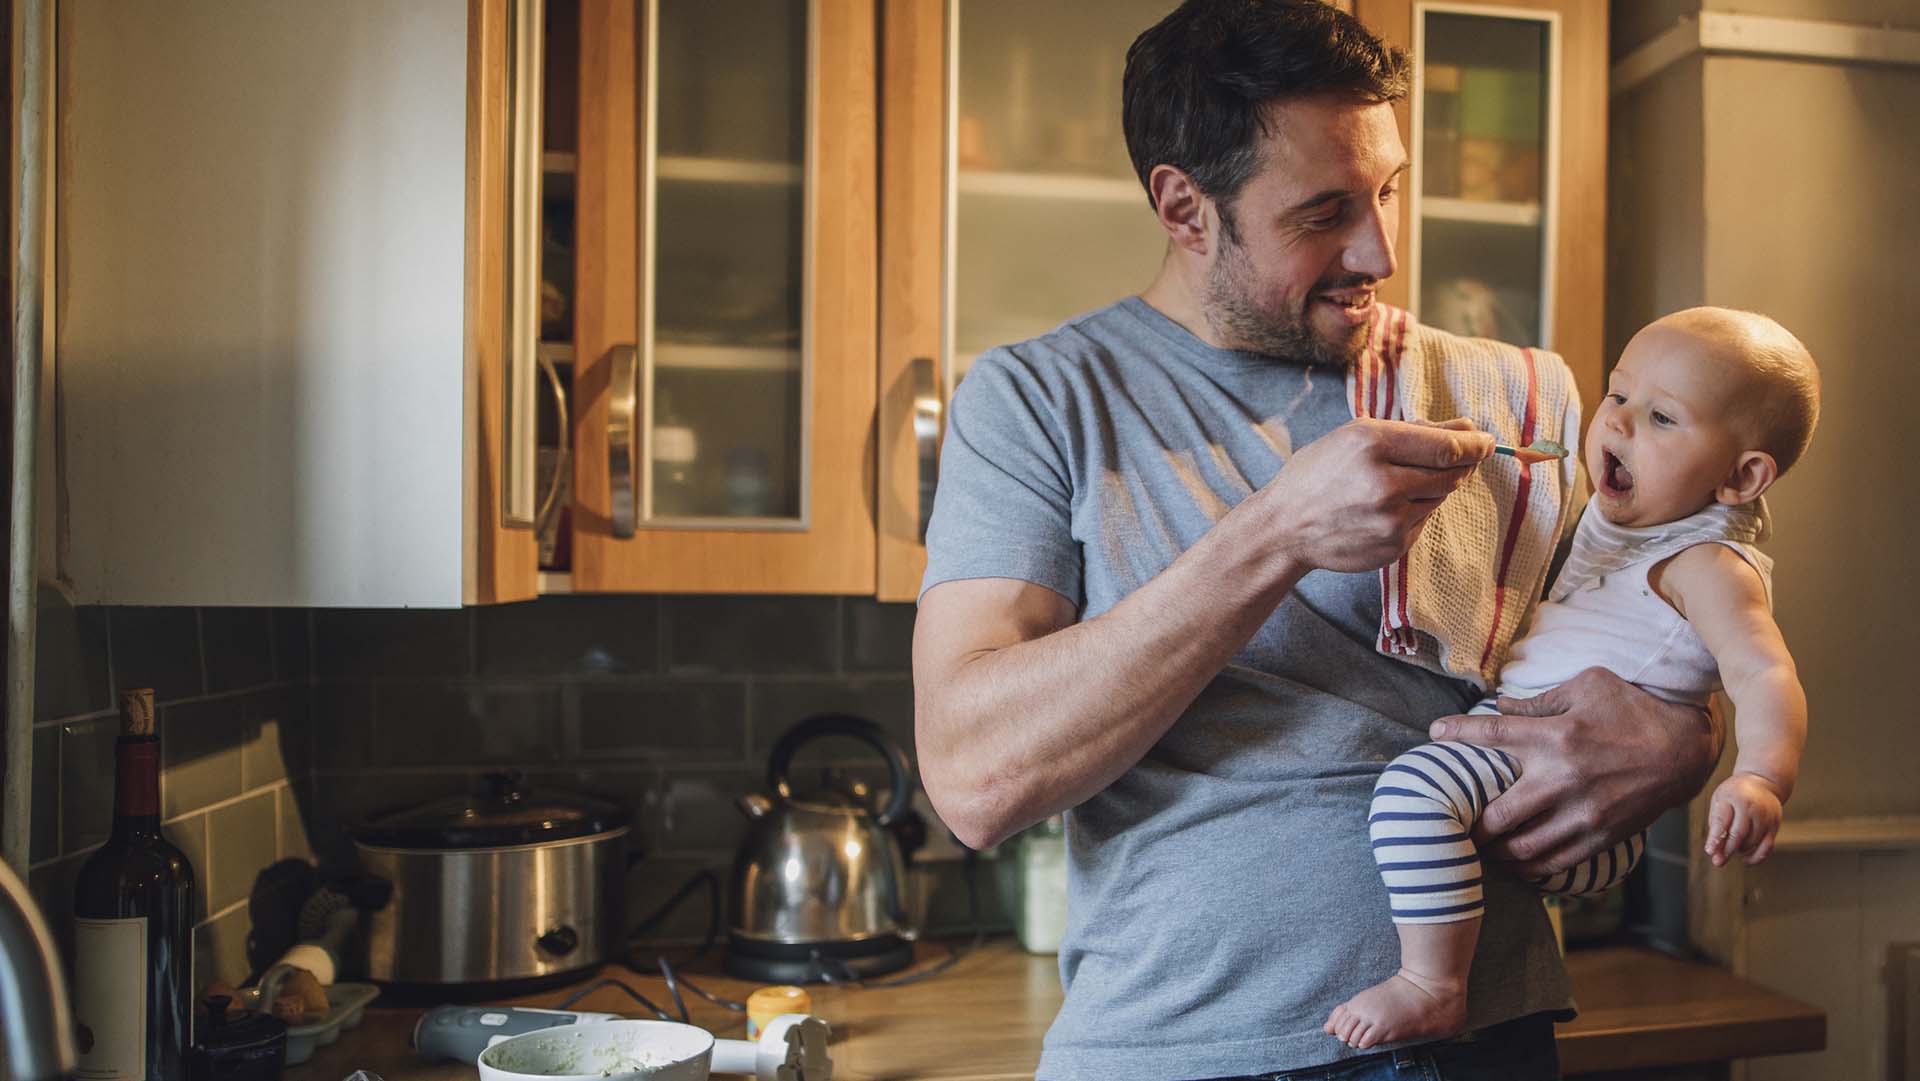 Father is standing in the kitchen of his home with his baby in his arms. He is feeding him with a spoon and spinach and vegetables can be seen on the worktop with a blender.